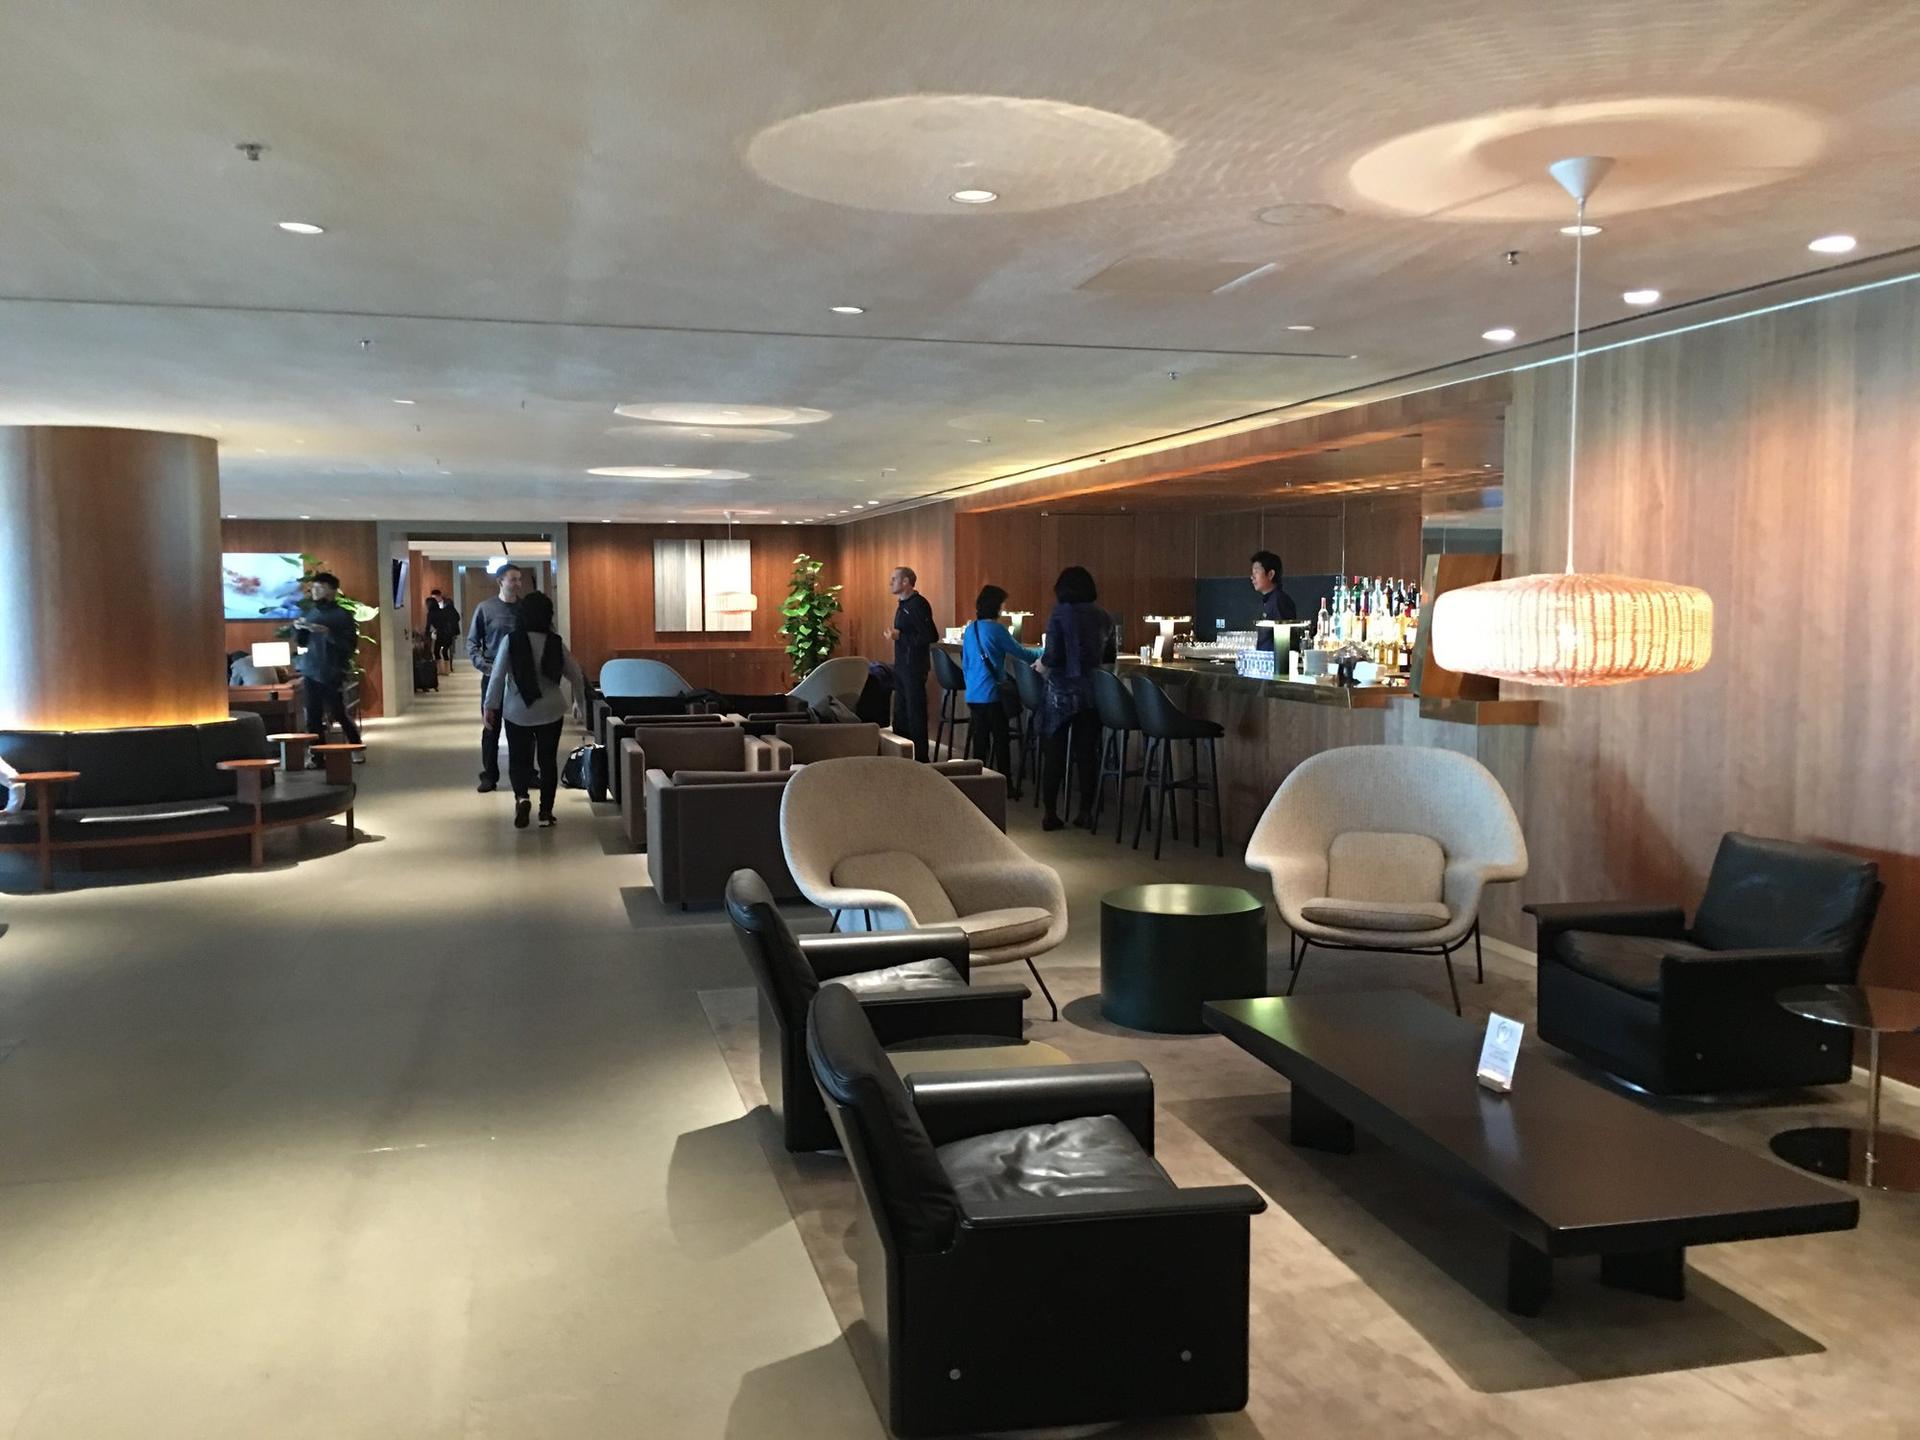 Cathay Pacific The Pier Business Class Lounge image 33 of 61